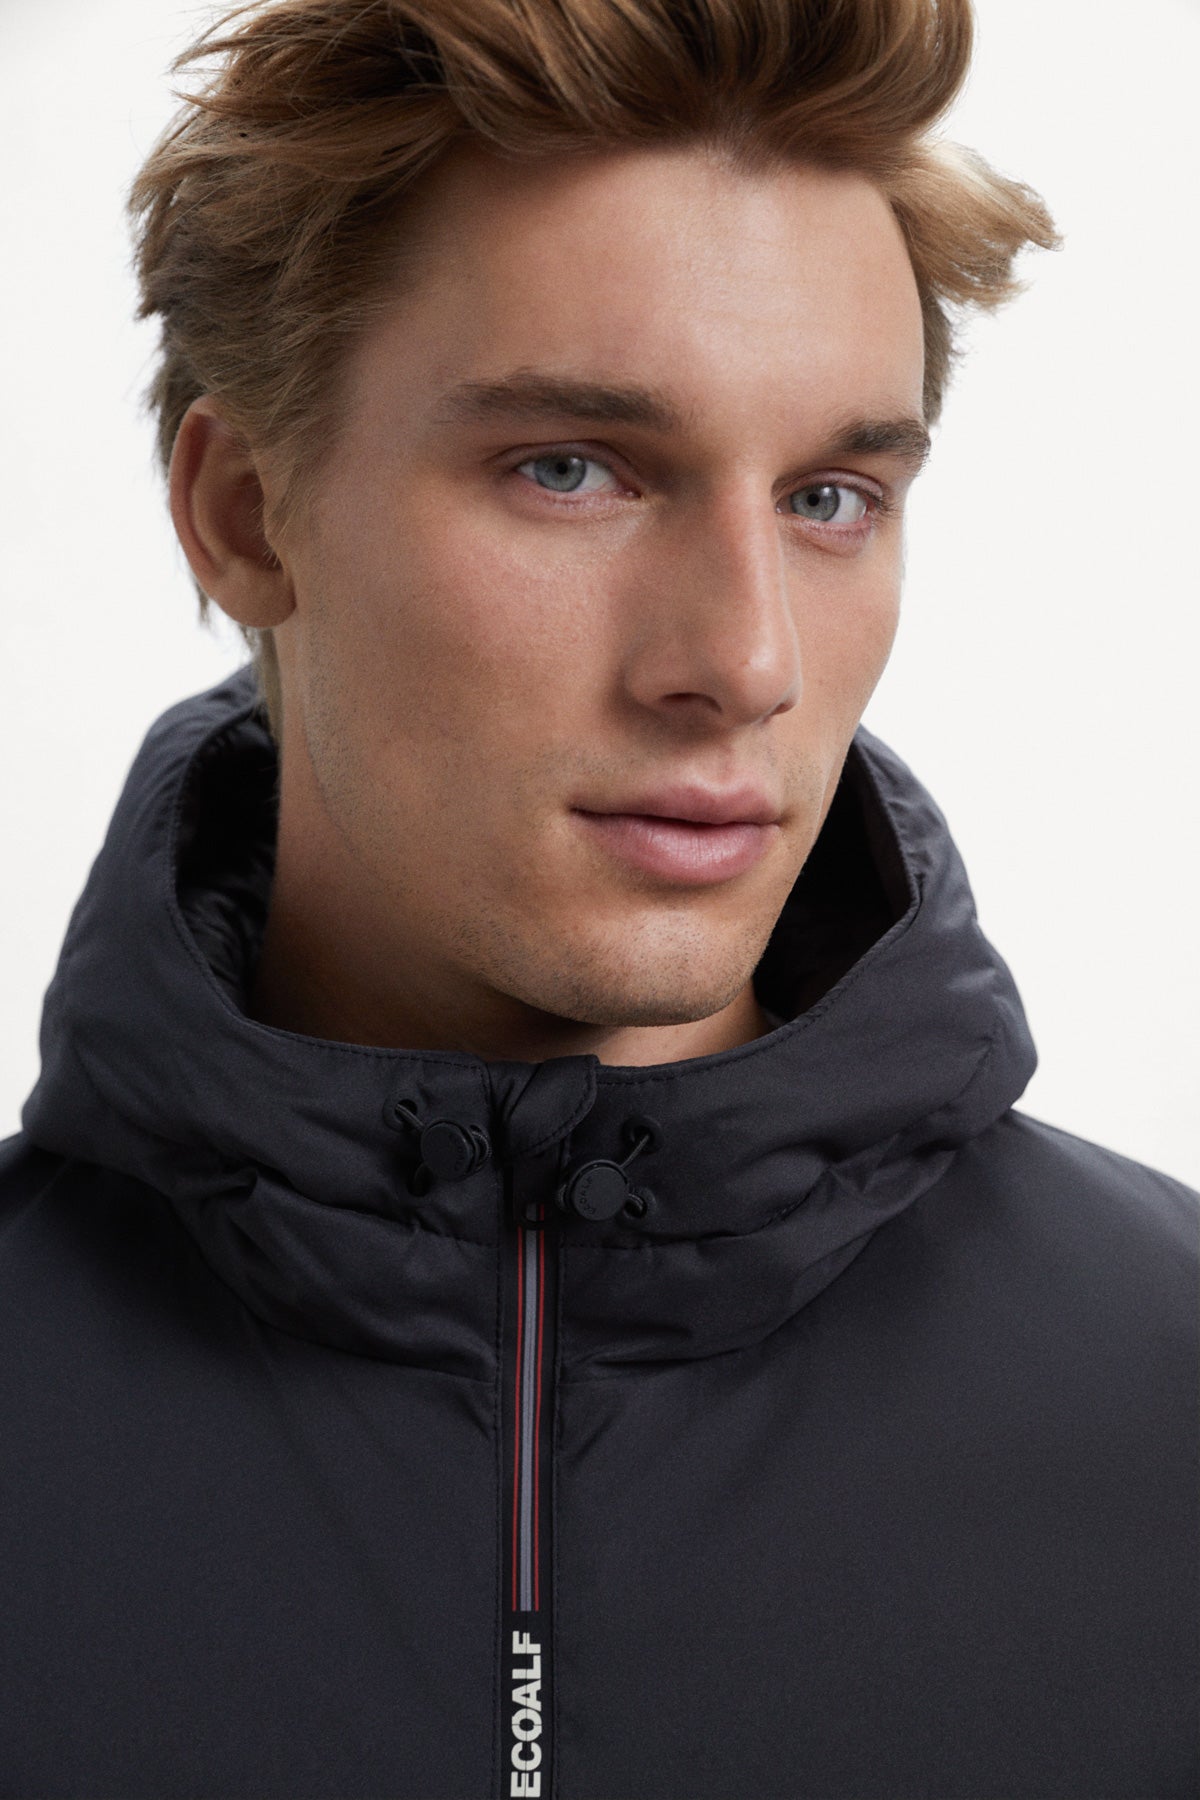 Cartes jacket with a hood to protect you from the rain | ECOALF